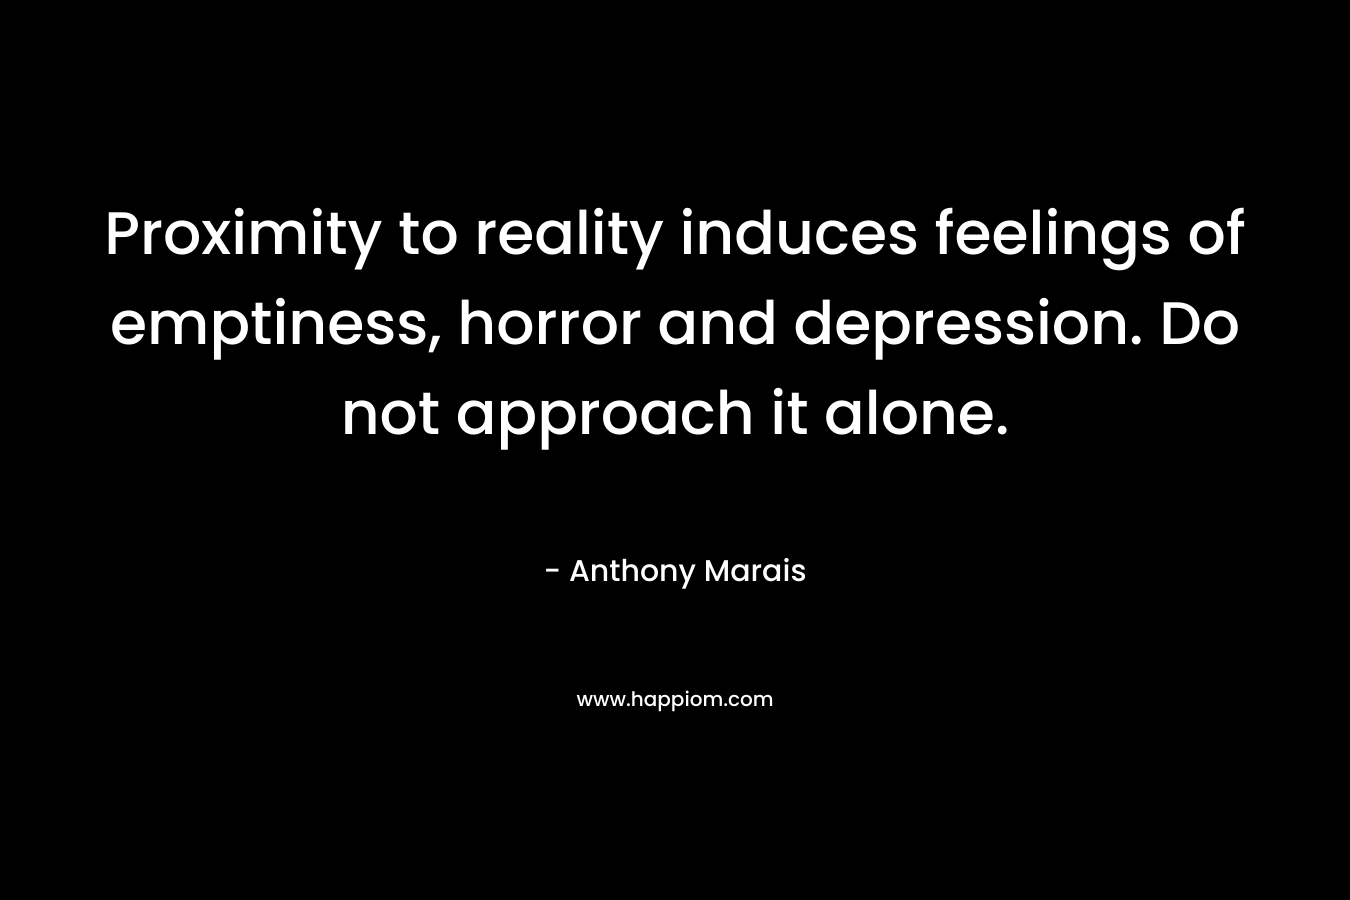 Proximity to reality induces feelings of emptiness, horror and depression. Do not approach it alone. – Anthony Marais